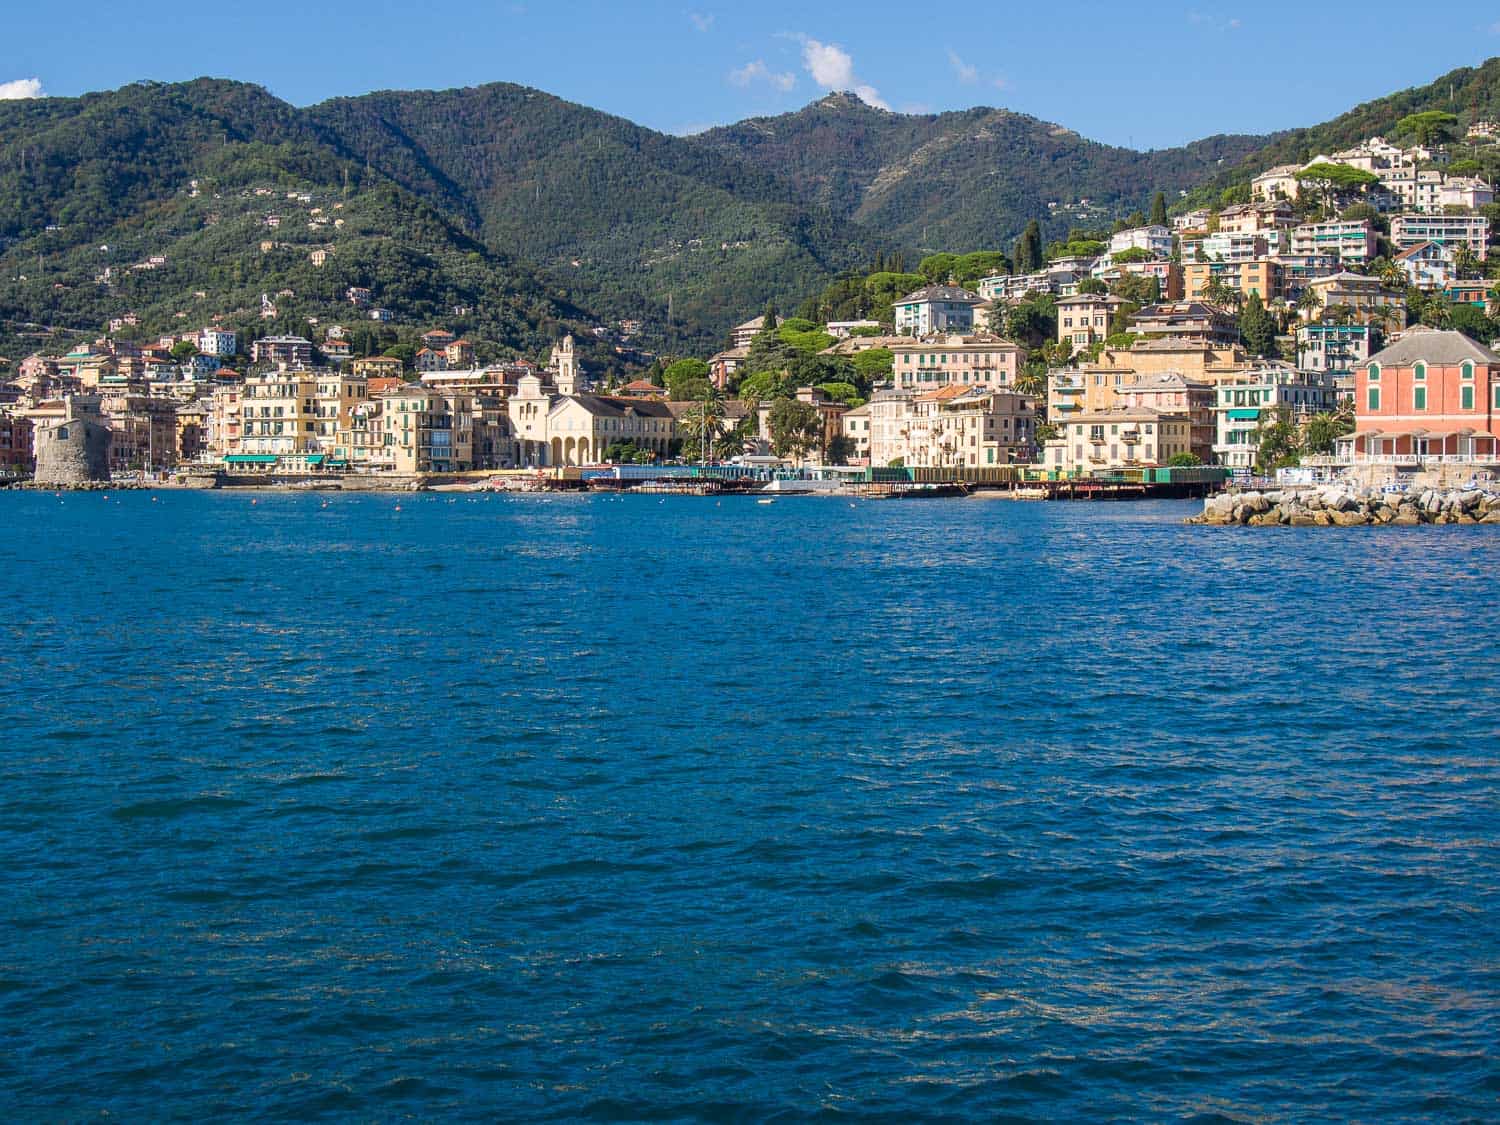 This Iconic Hotel on the Italian Riviera Reopens in June With a